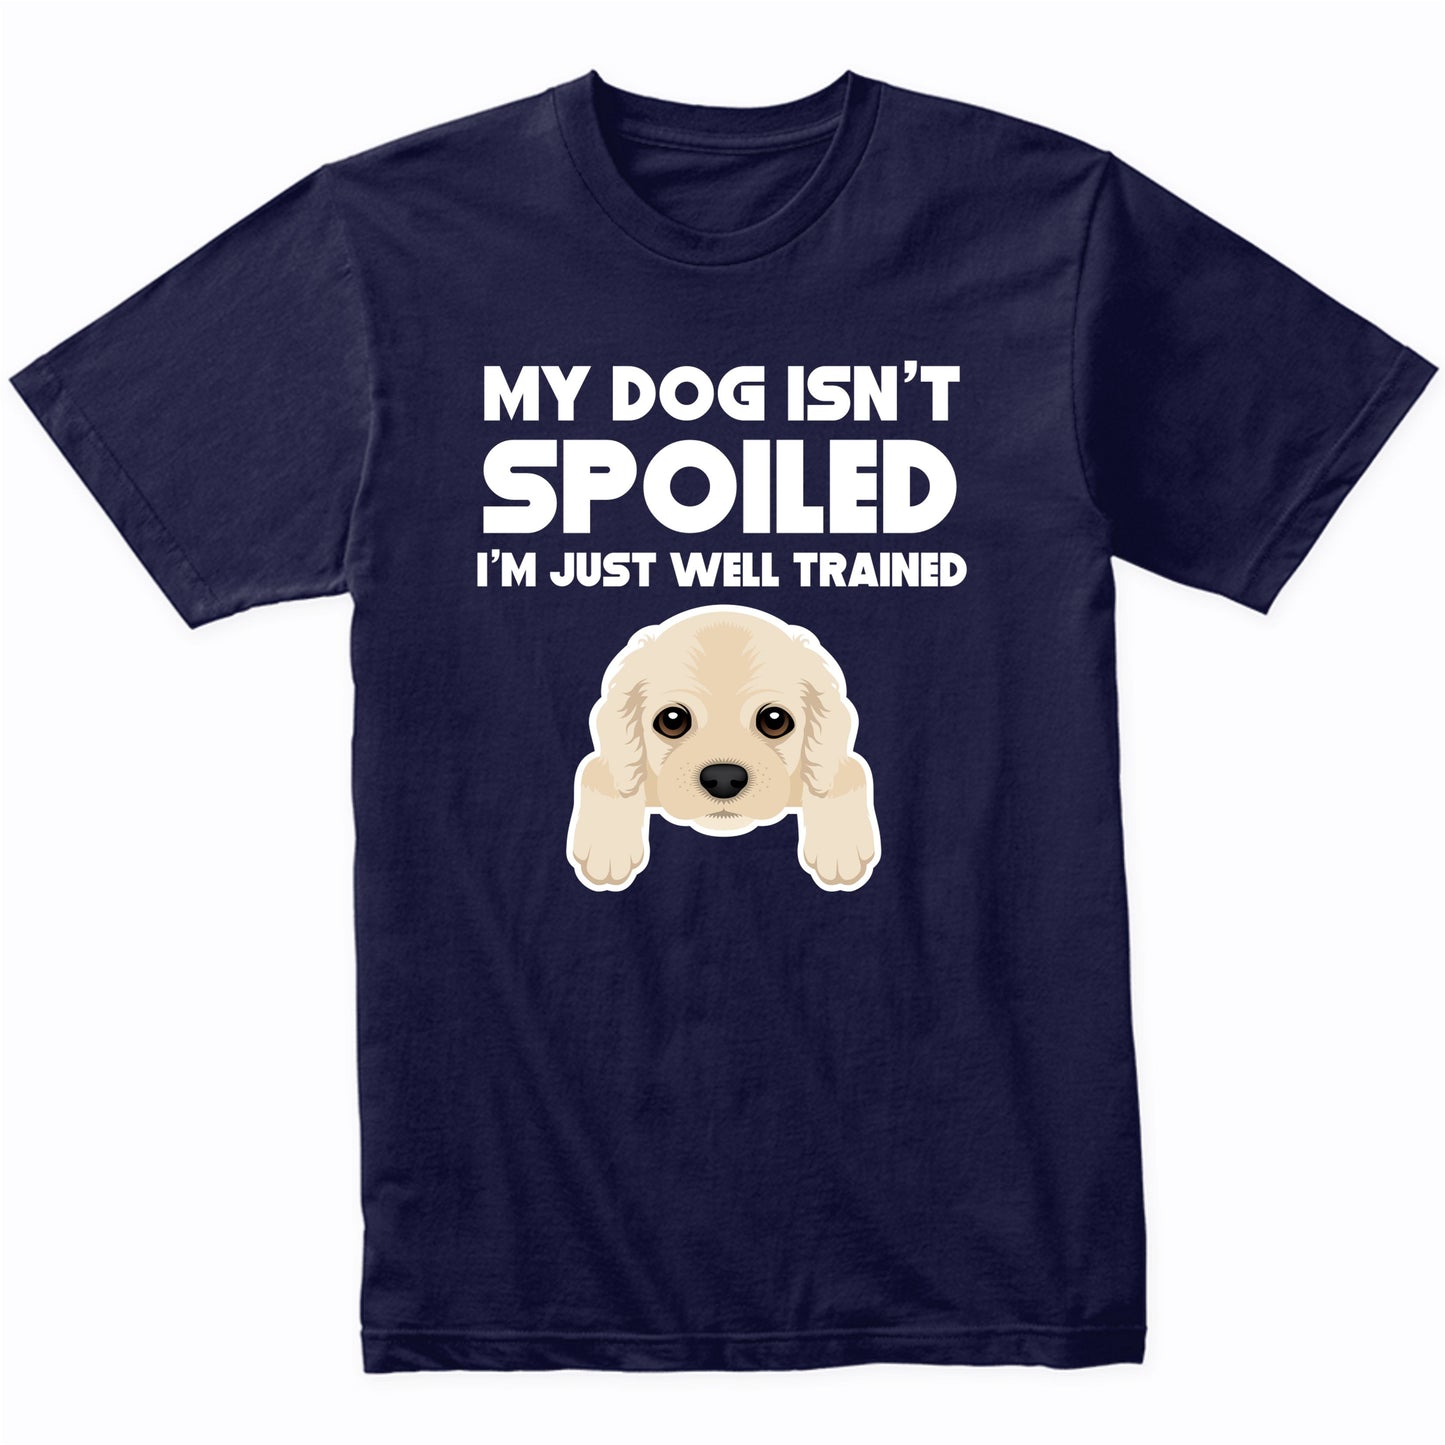 My Dog Isn't Spoiled I'm Just Well Trained Funny Cocker Spaniel T-Shirt